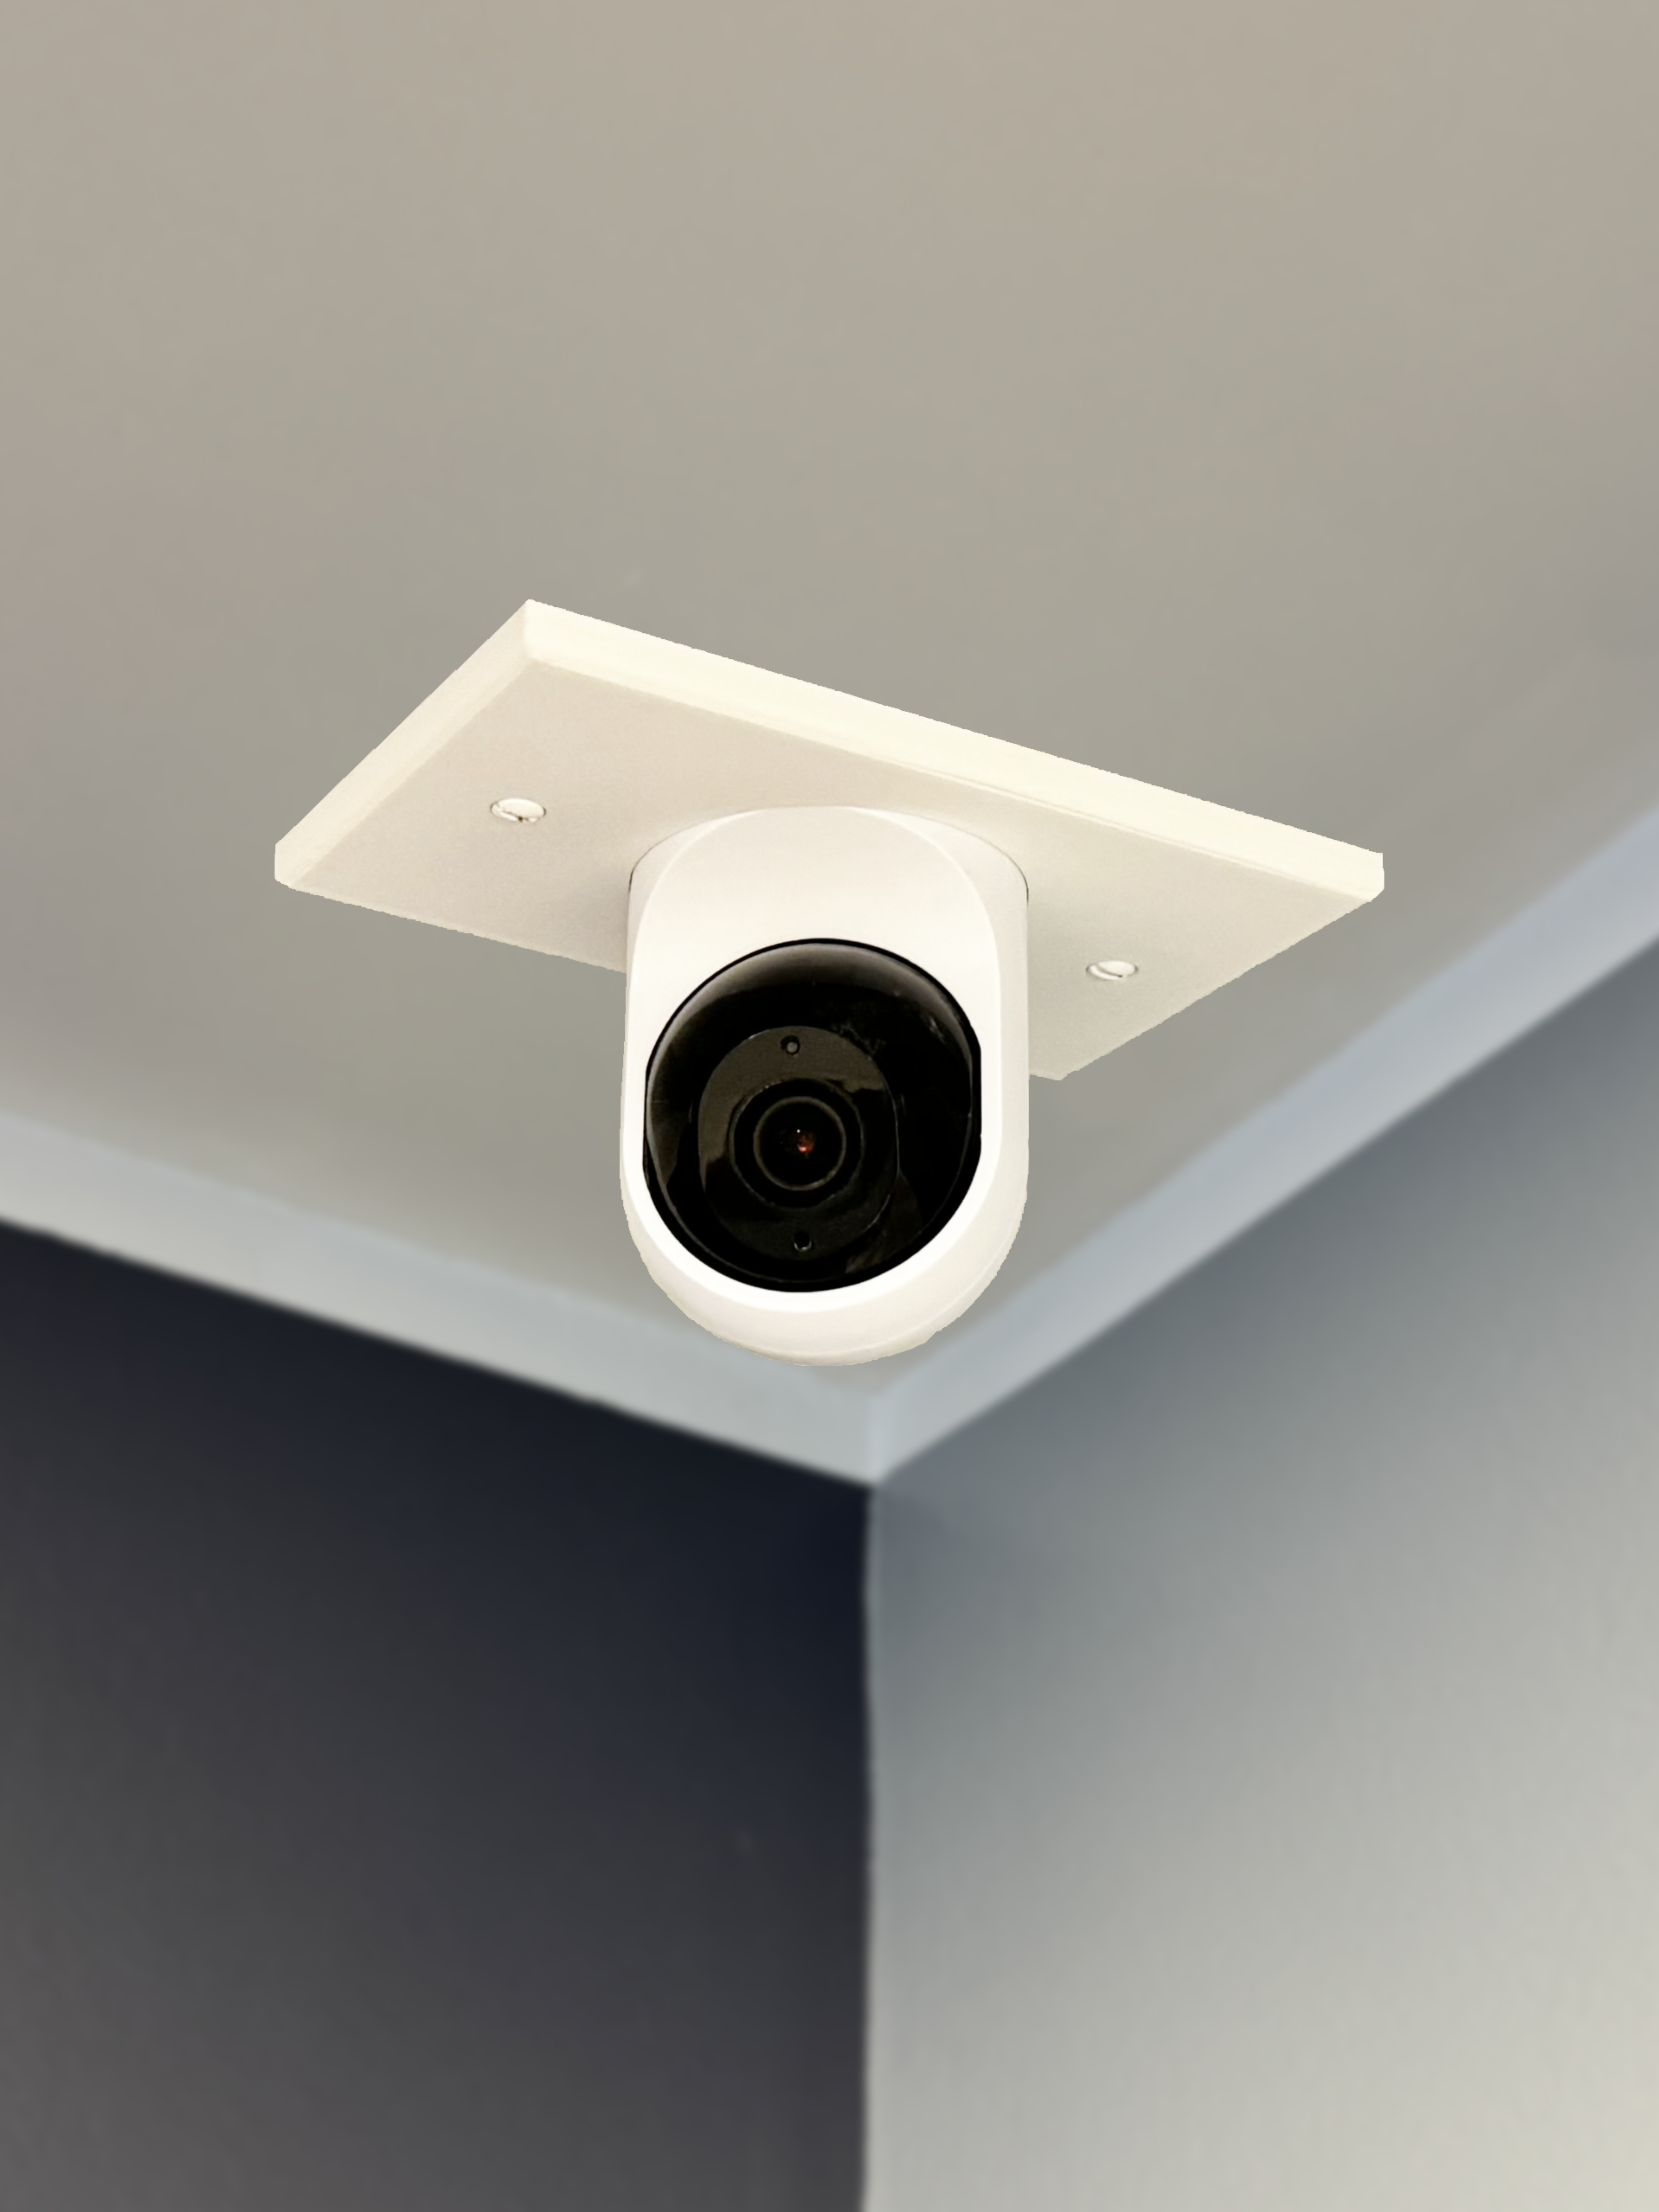 Camera Bracket mounted on a ceiling